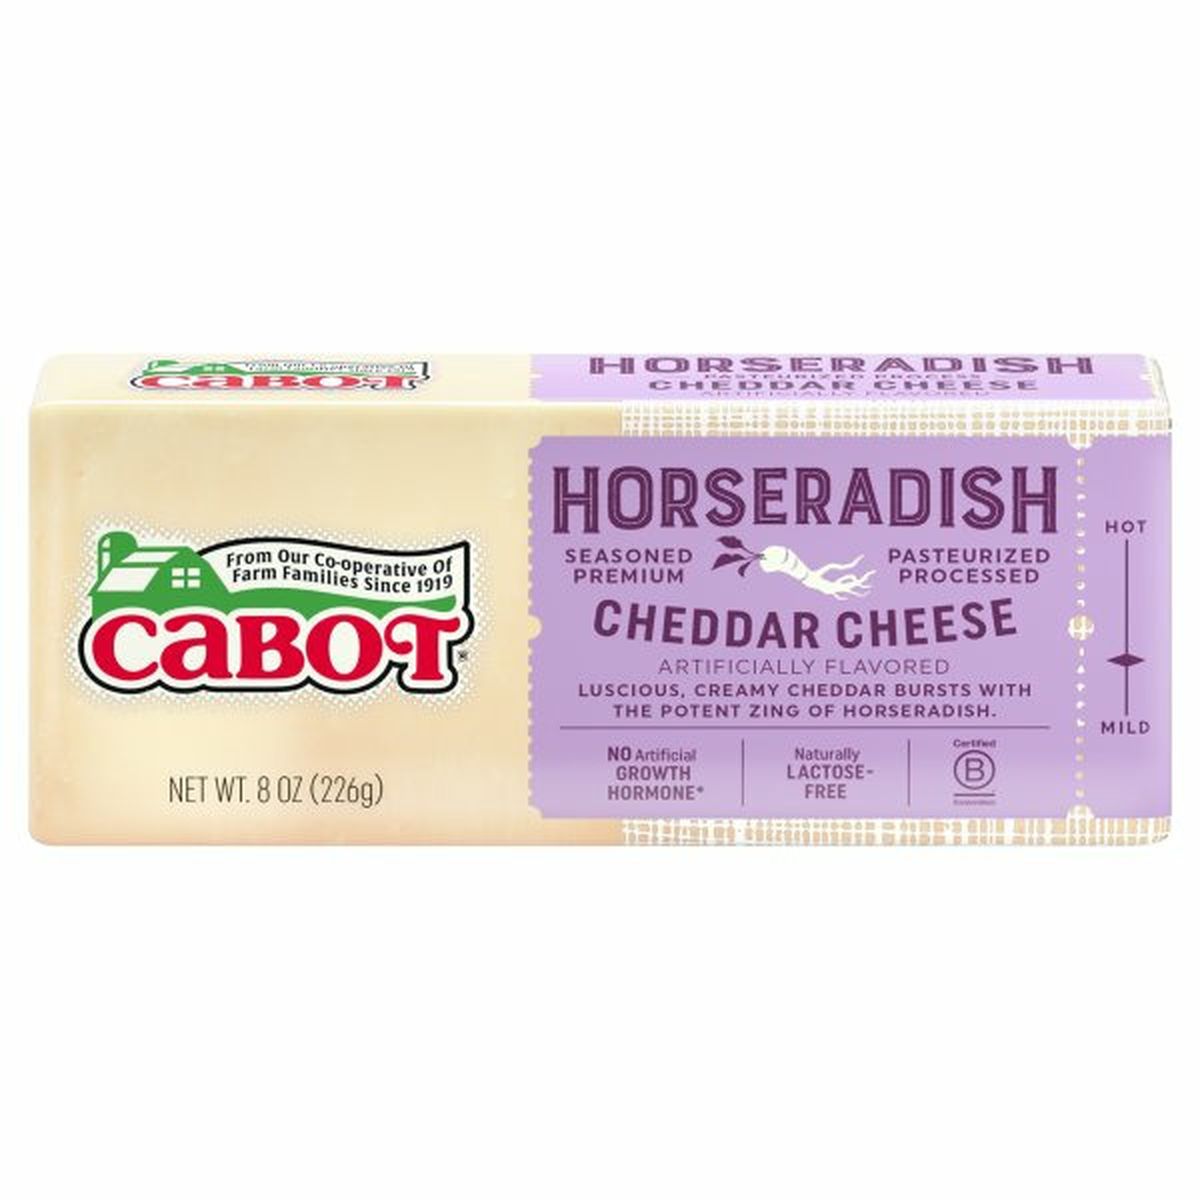 Calories in Cabot Cheese, Cheddar, Horseradish